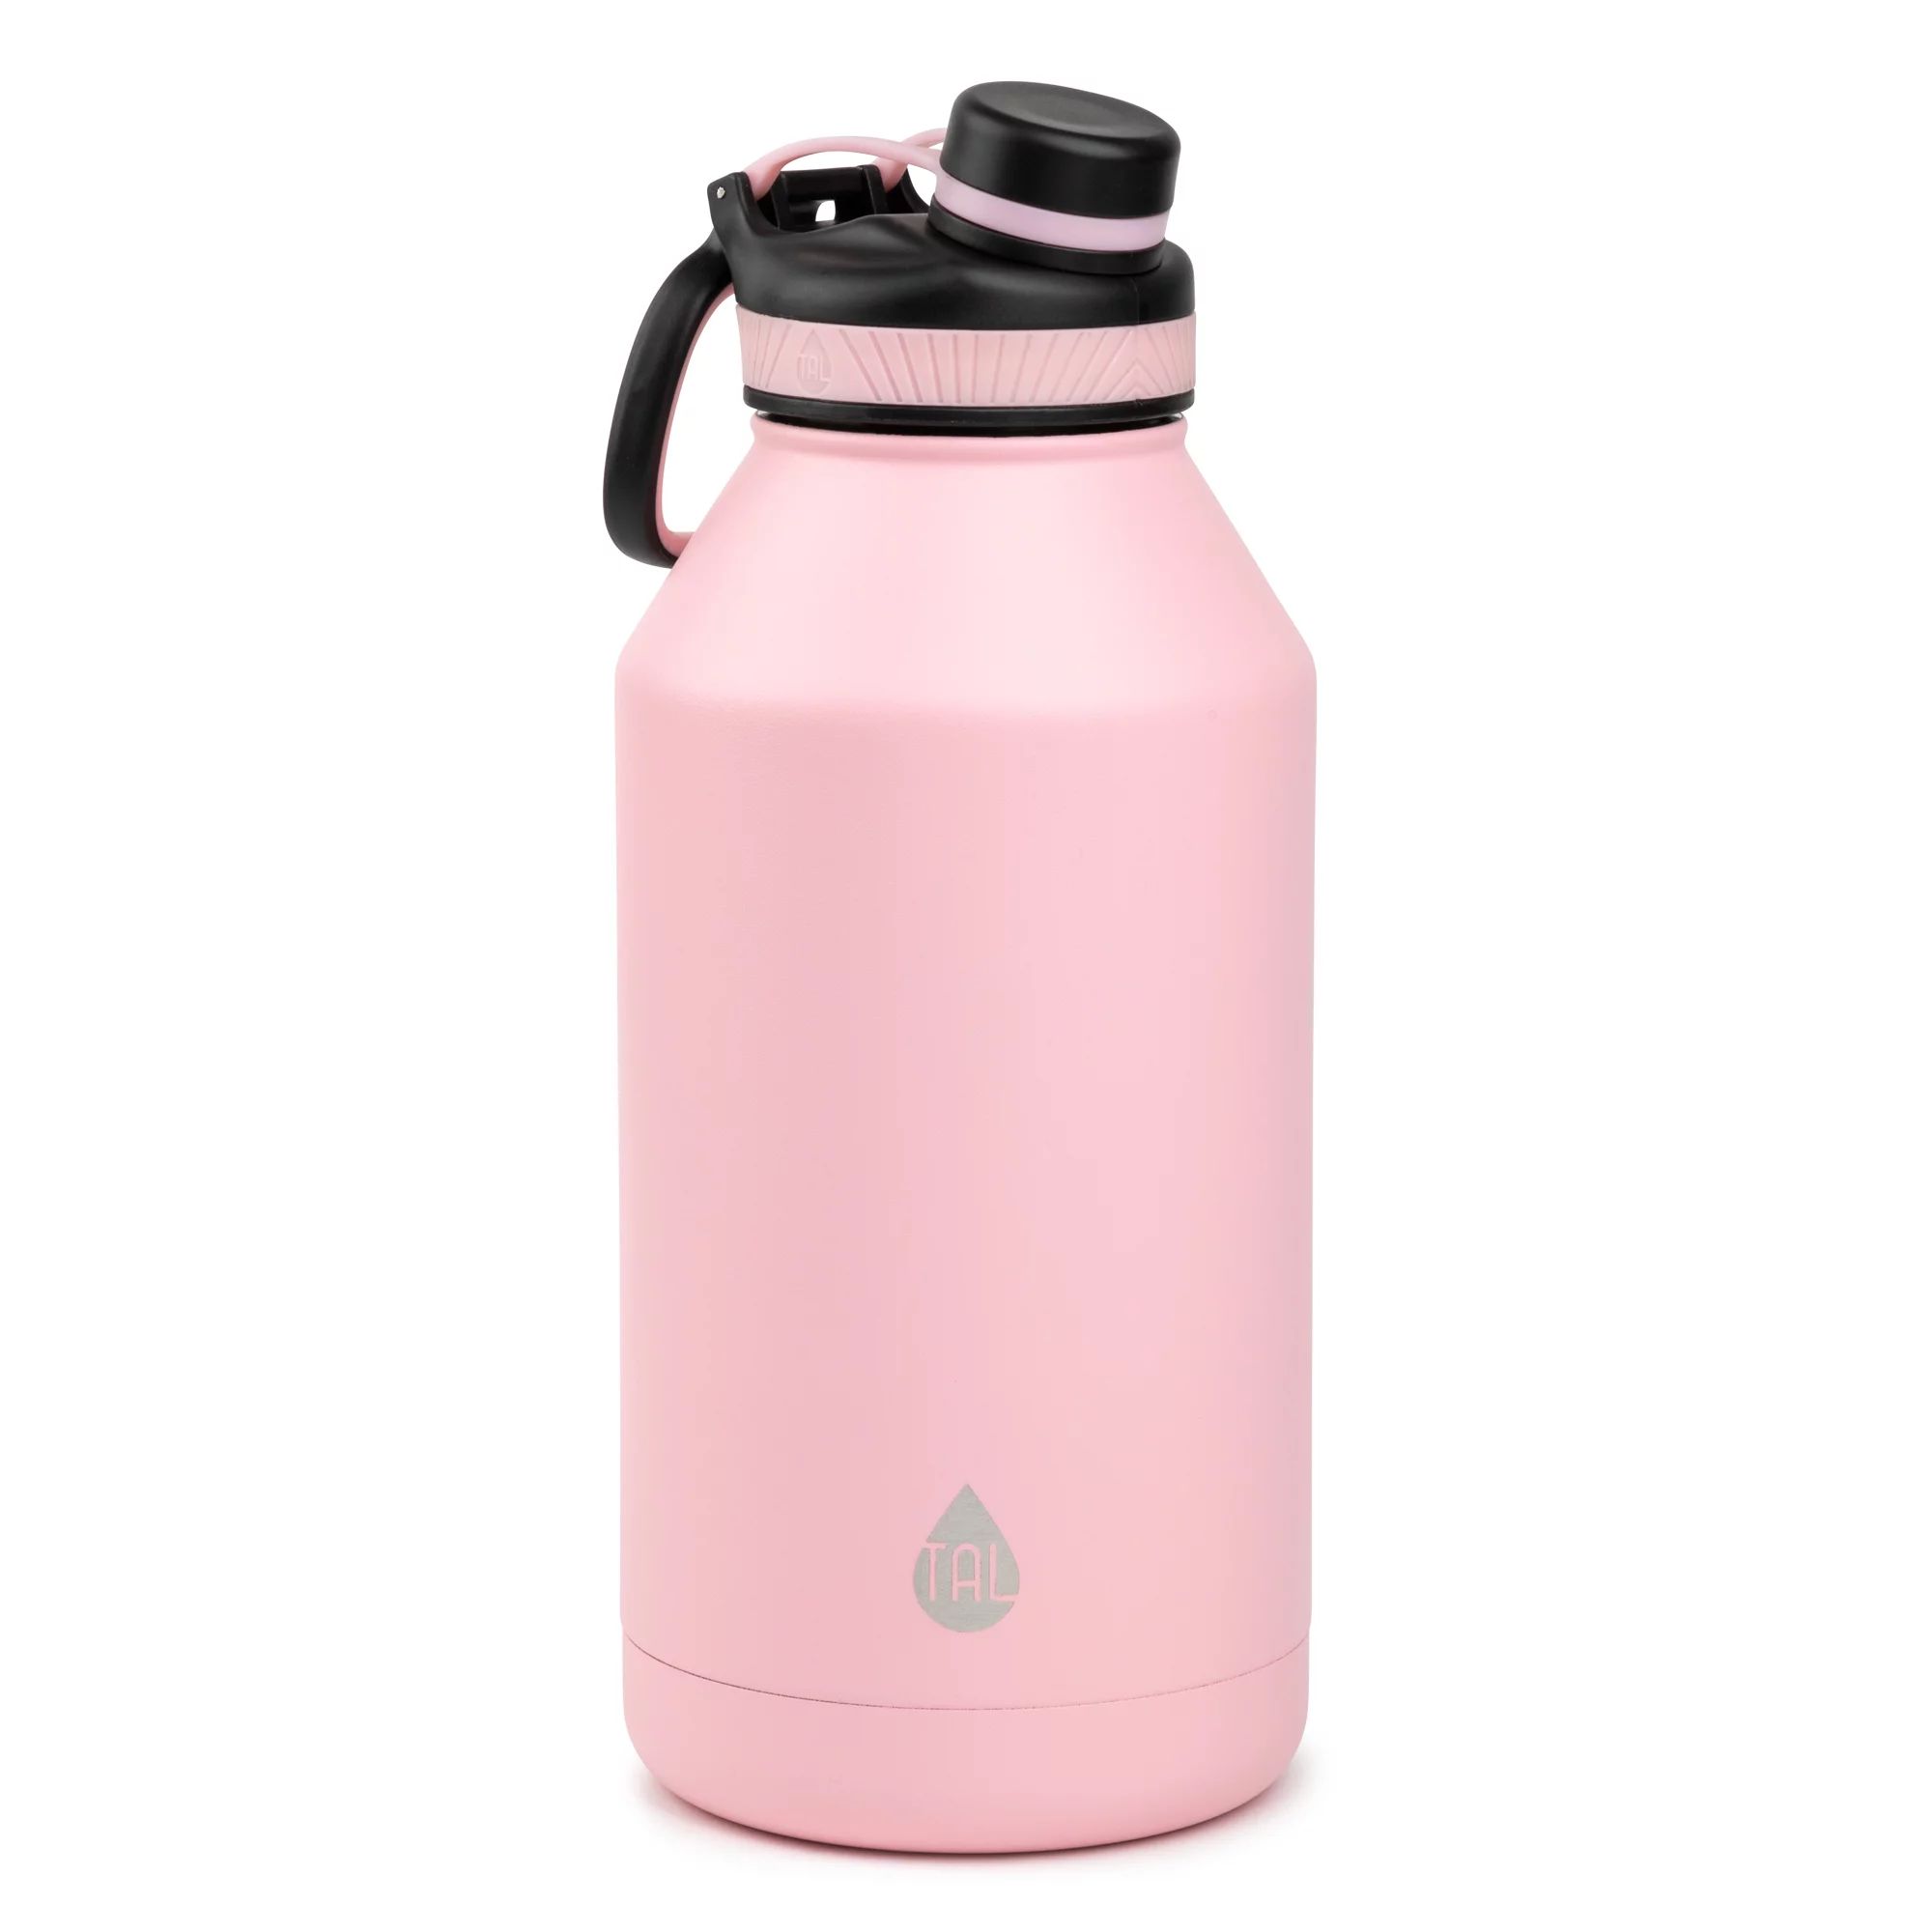 TAL Ranger 64 oz Pink and Black Solid Print Insulated Stainless Steel Water Bottle with Wide Mout... | Walmart (US)